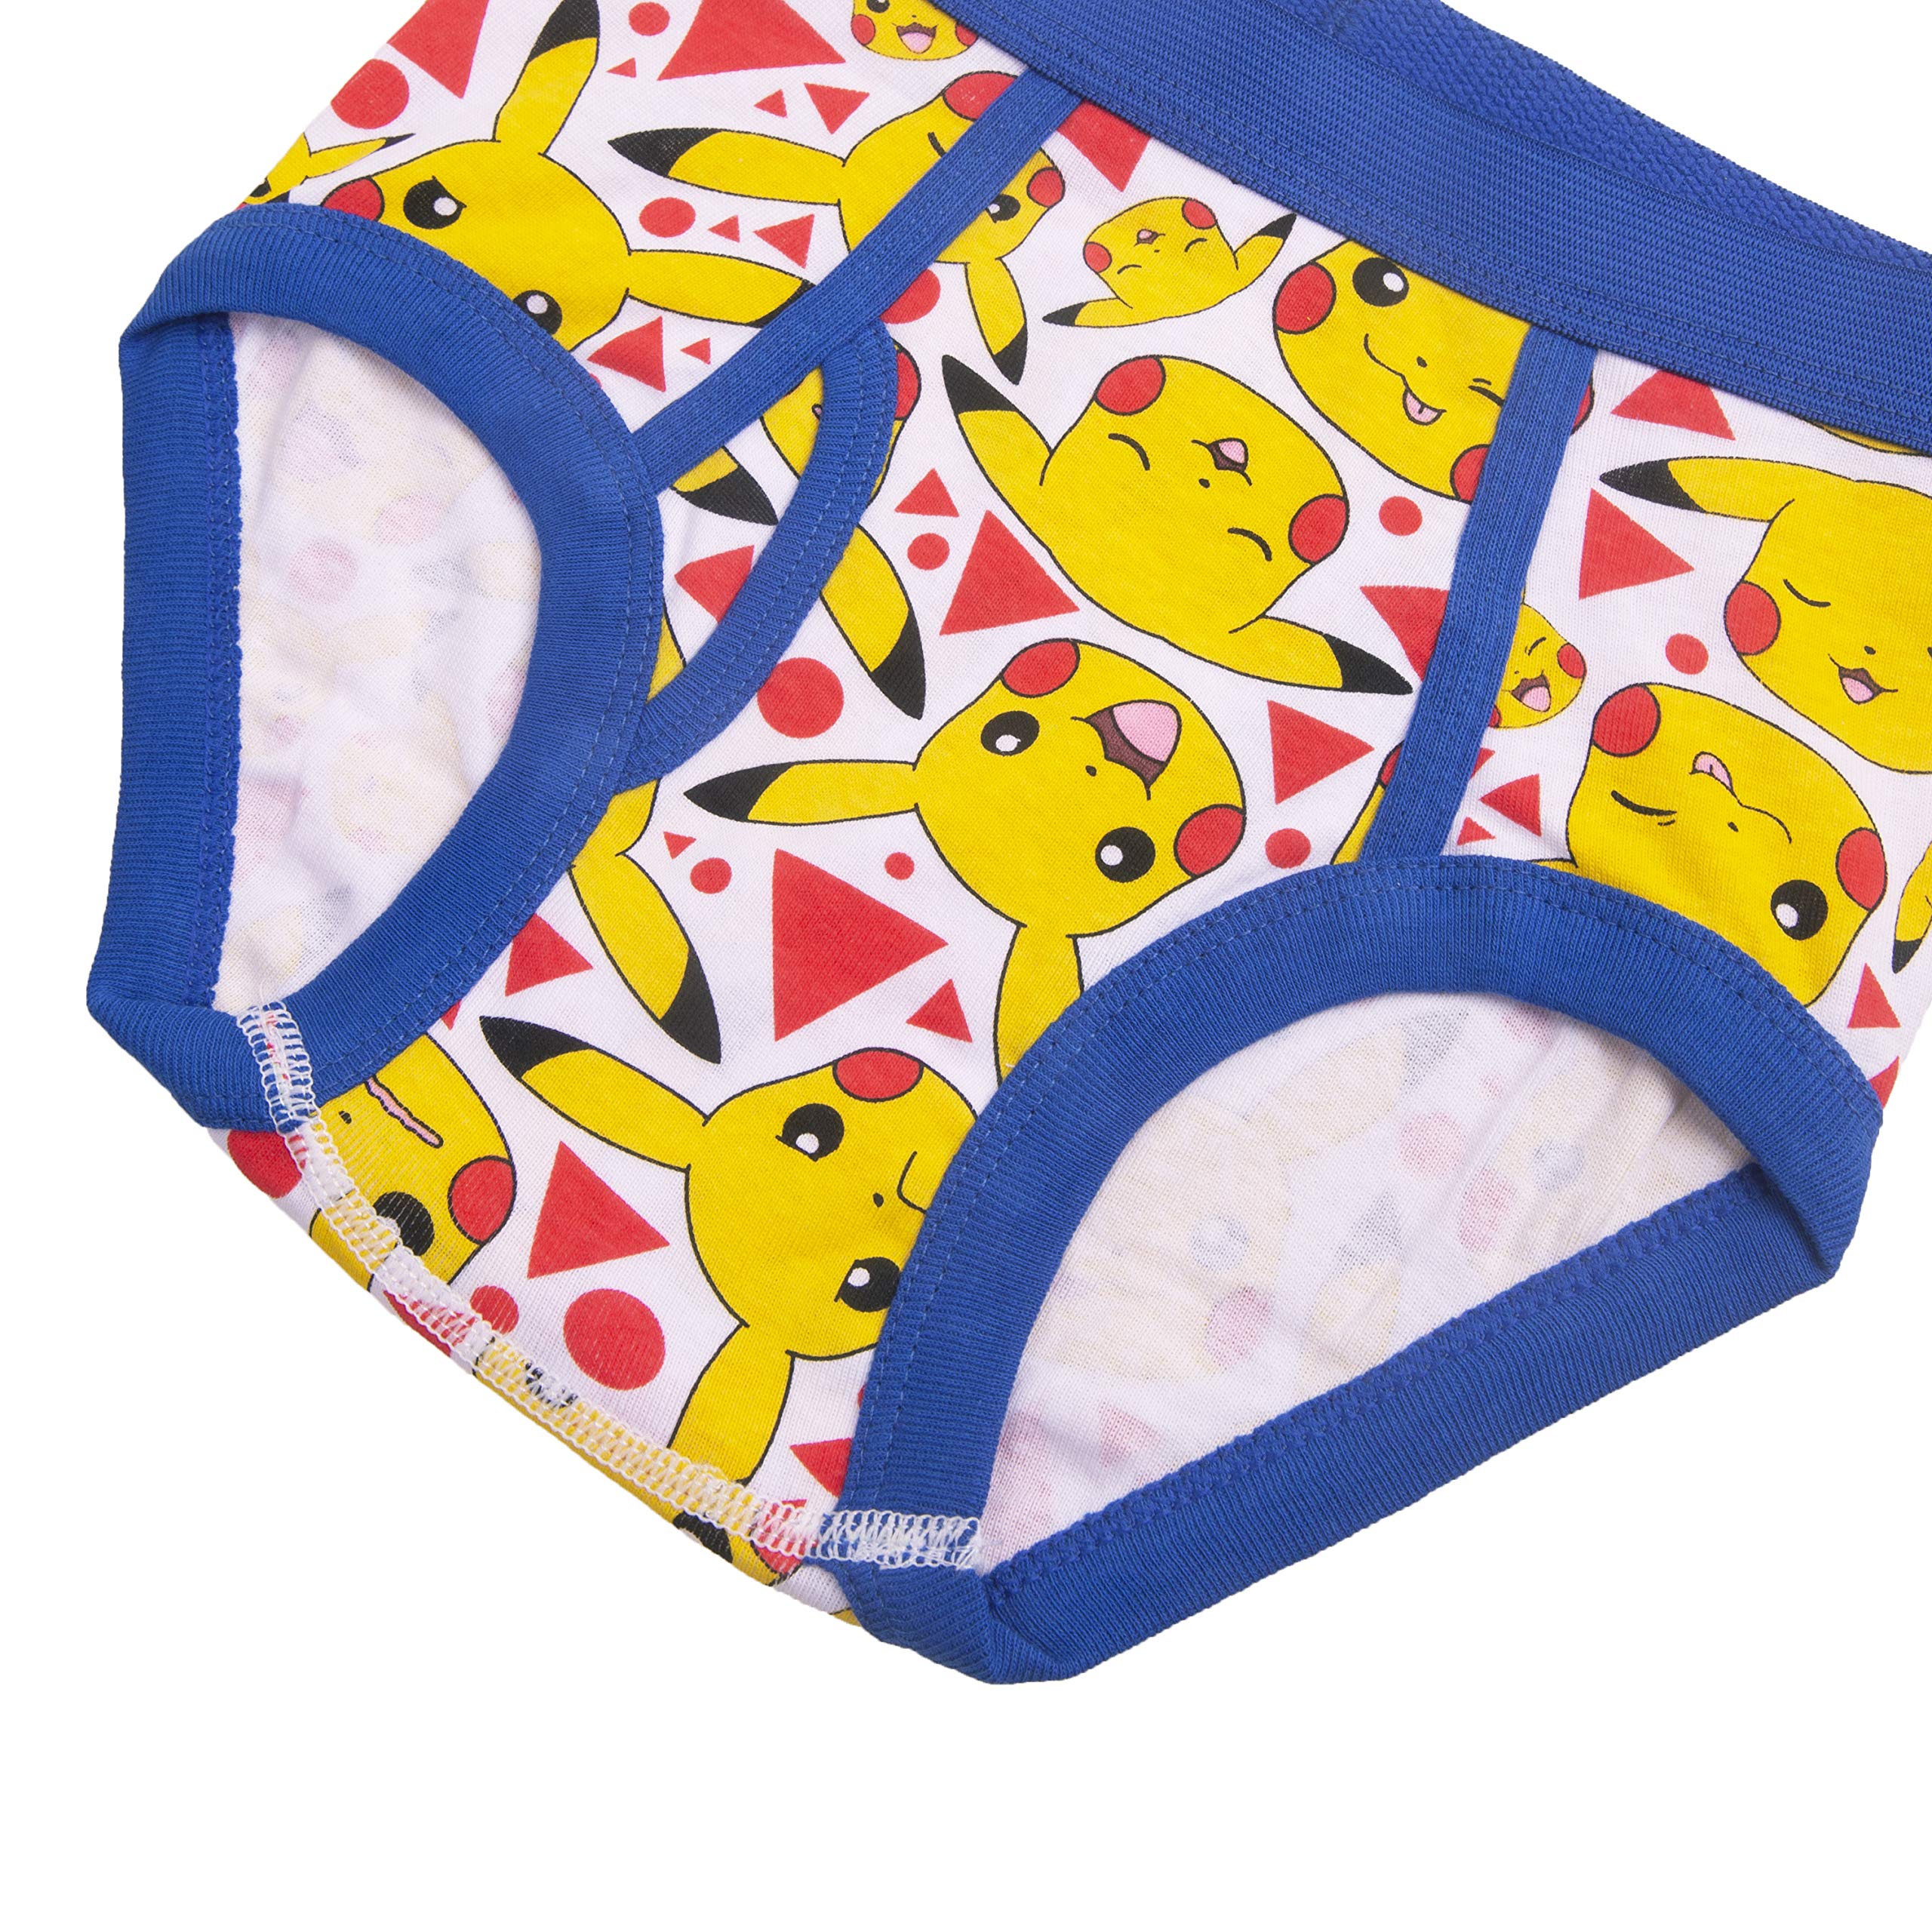 Pokemon Boys' 100% Combed Cotton Underwear with Pikachu, Evee, Squirtle, Jigglypuff and More in Sizes 4, 6 and 8